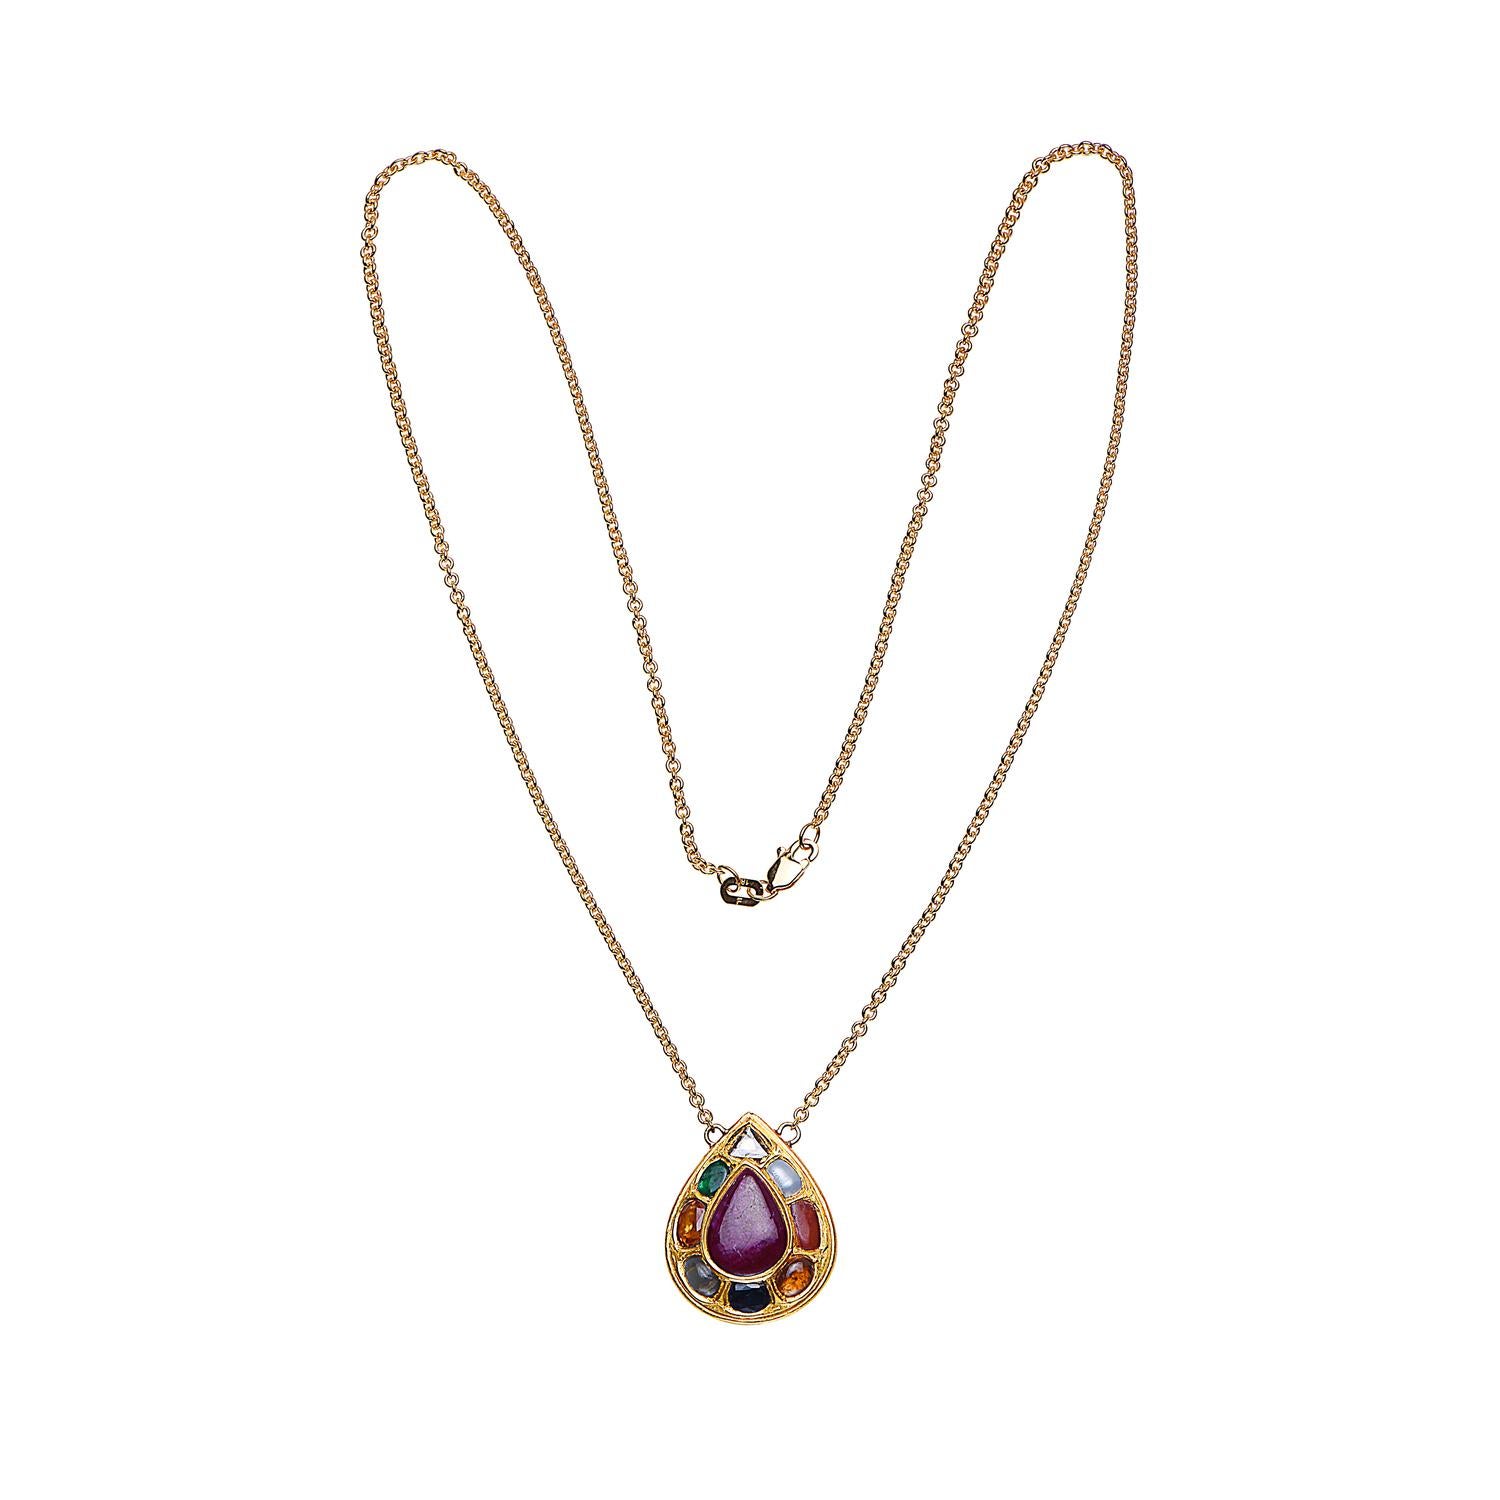 This lovely Navratna Necklace in 18K yellow gold is charmer for any occasion.

18k: 11.95g
Diamond: 0.10ct
Mix stones: 6.63ct